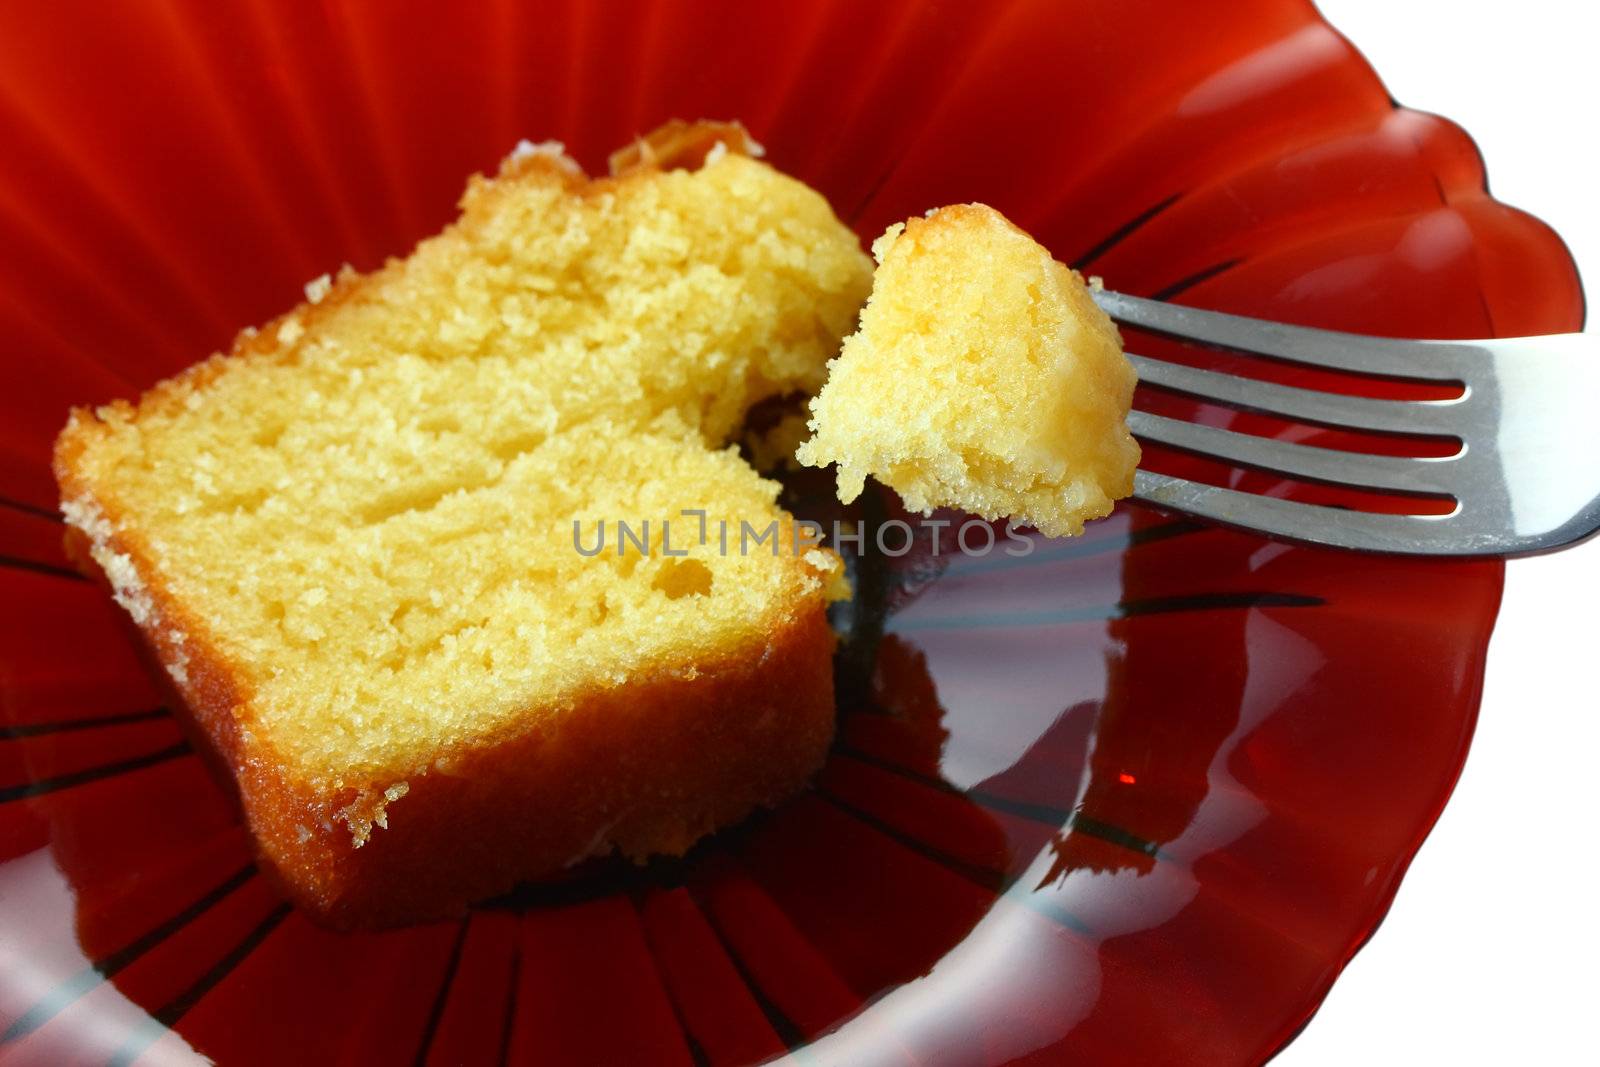 Slice of Pound Cake by Geoarts